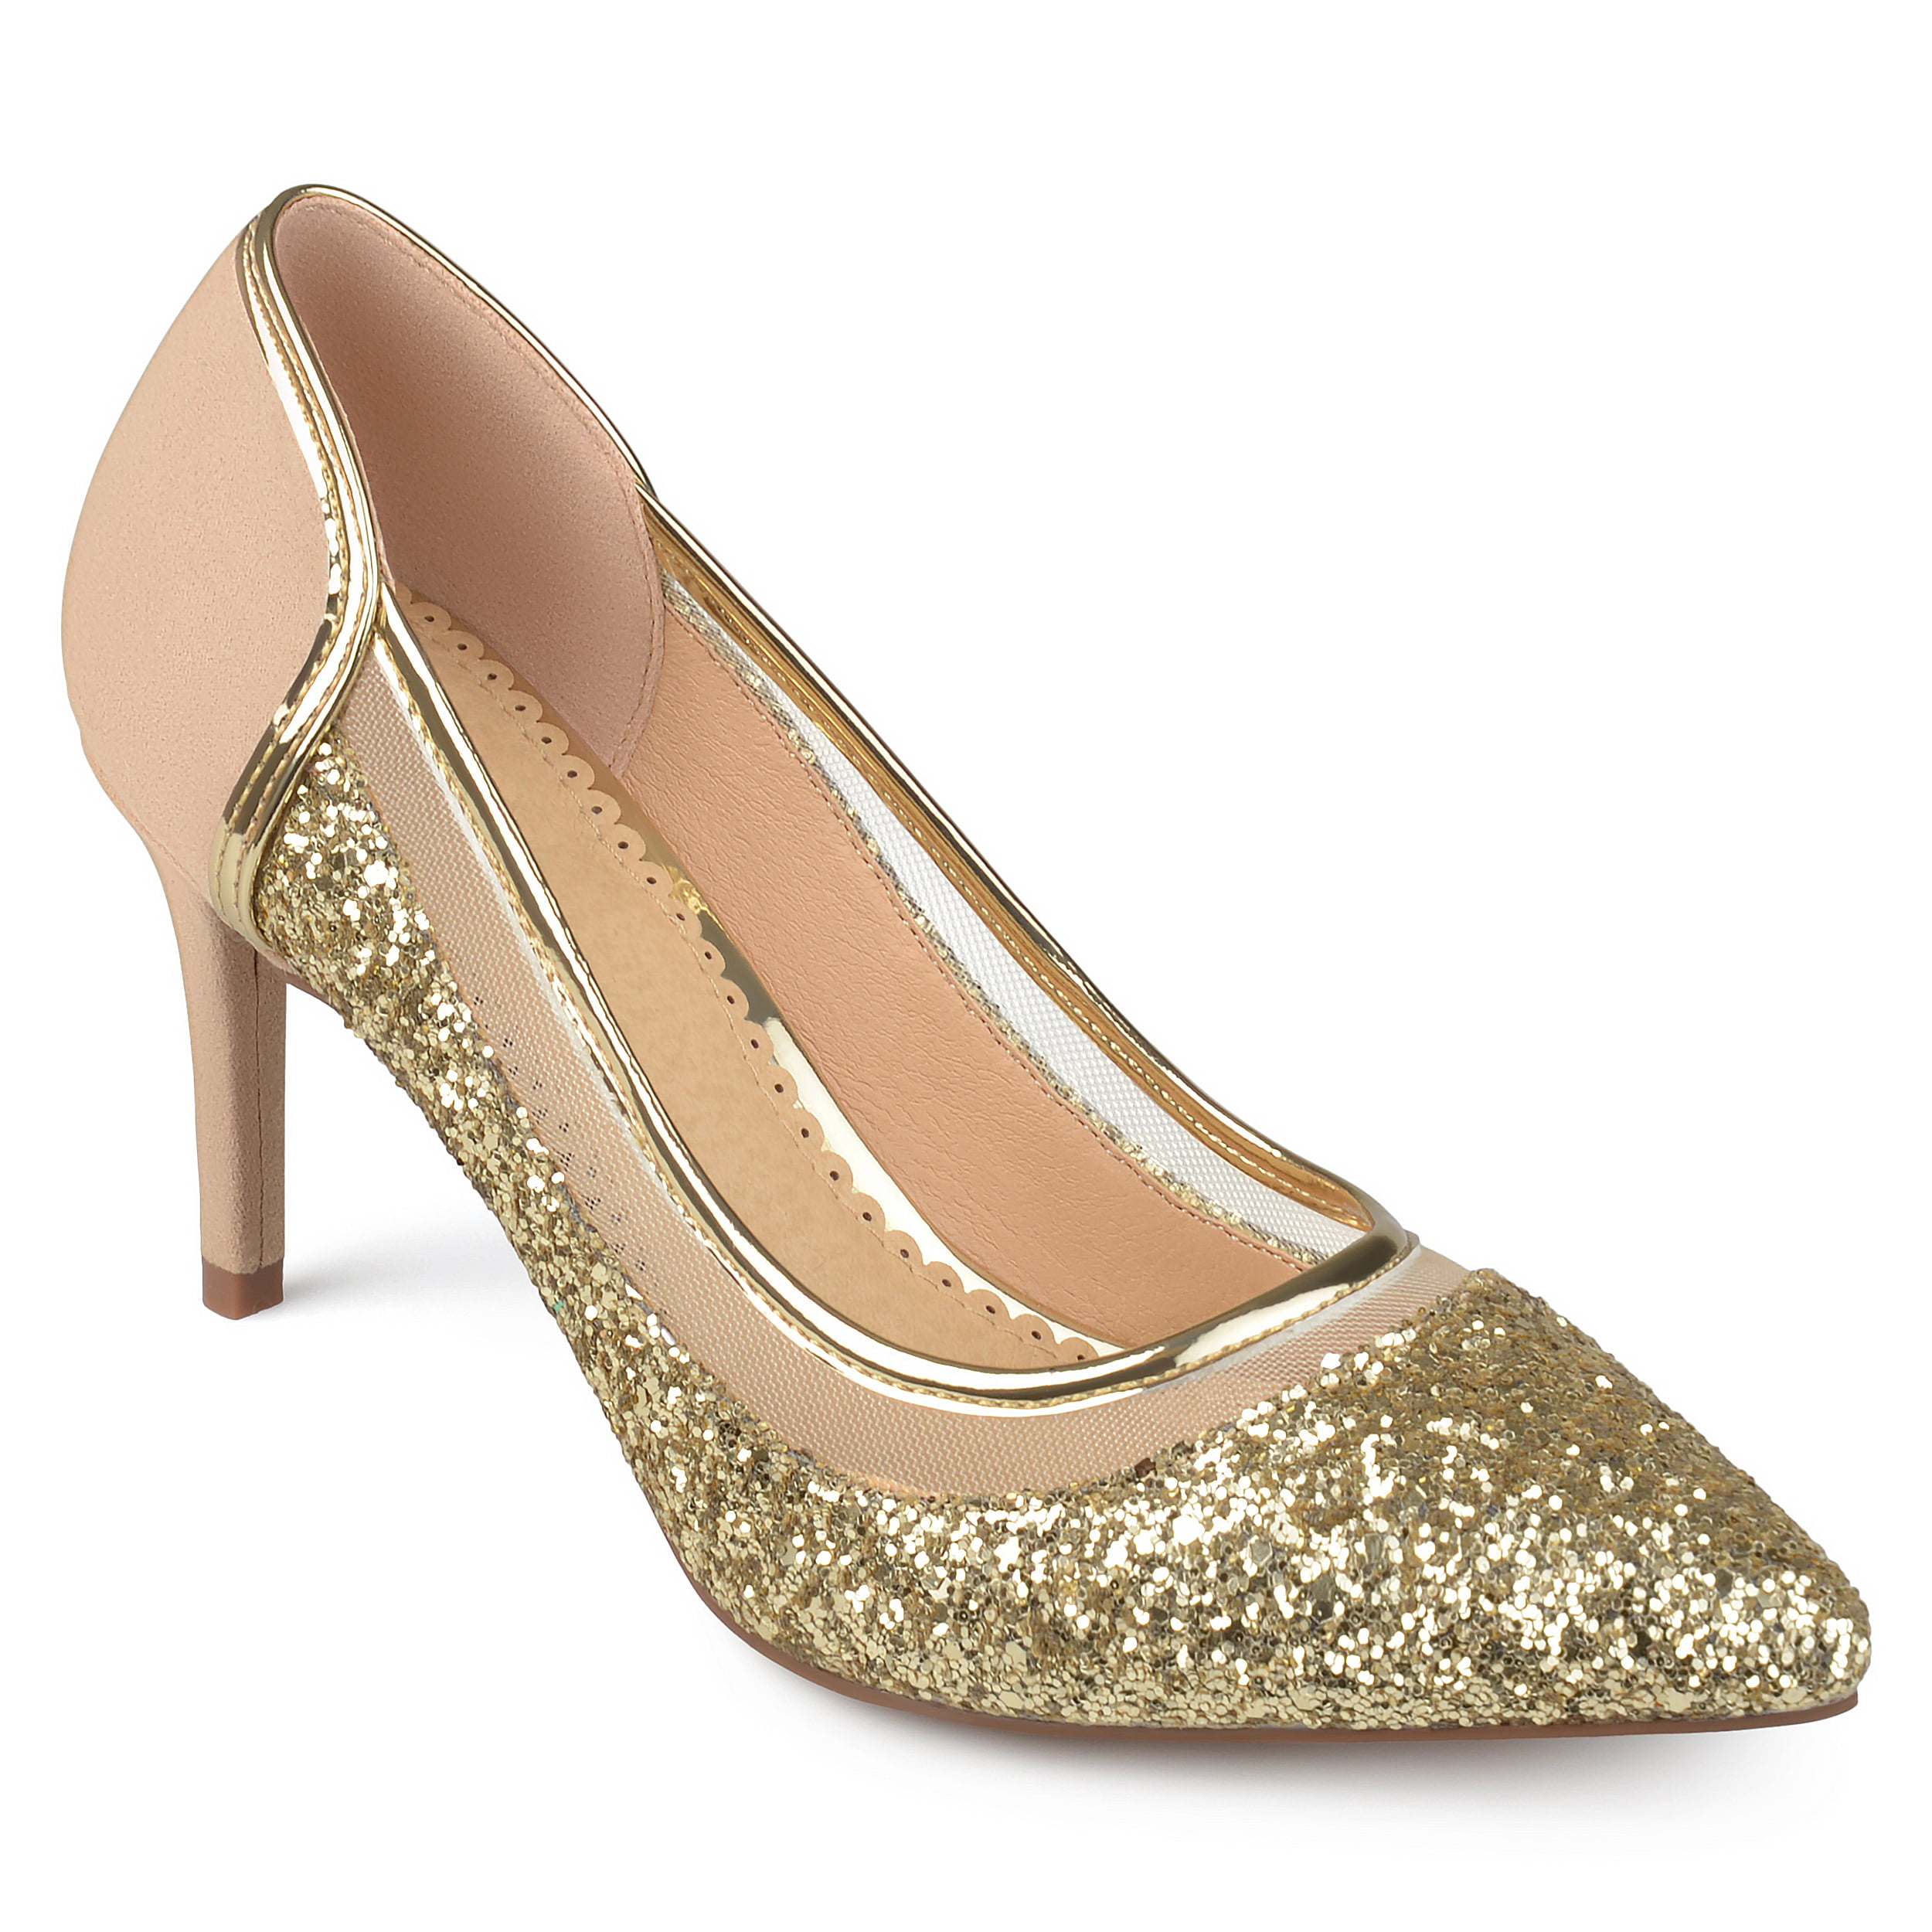 Brinley Co Womens Calico Pointed Toe Metallic Sequin Flats